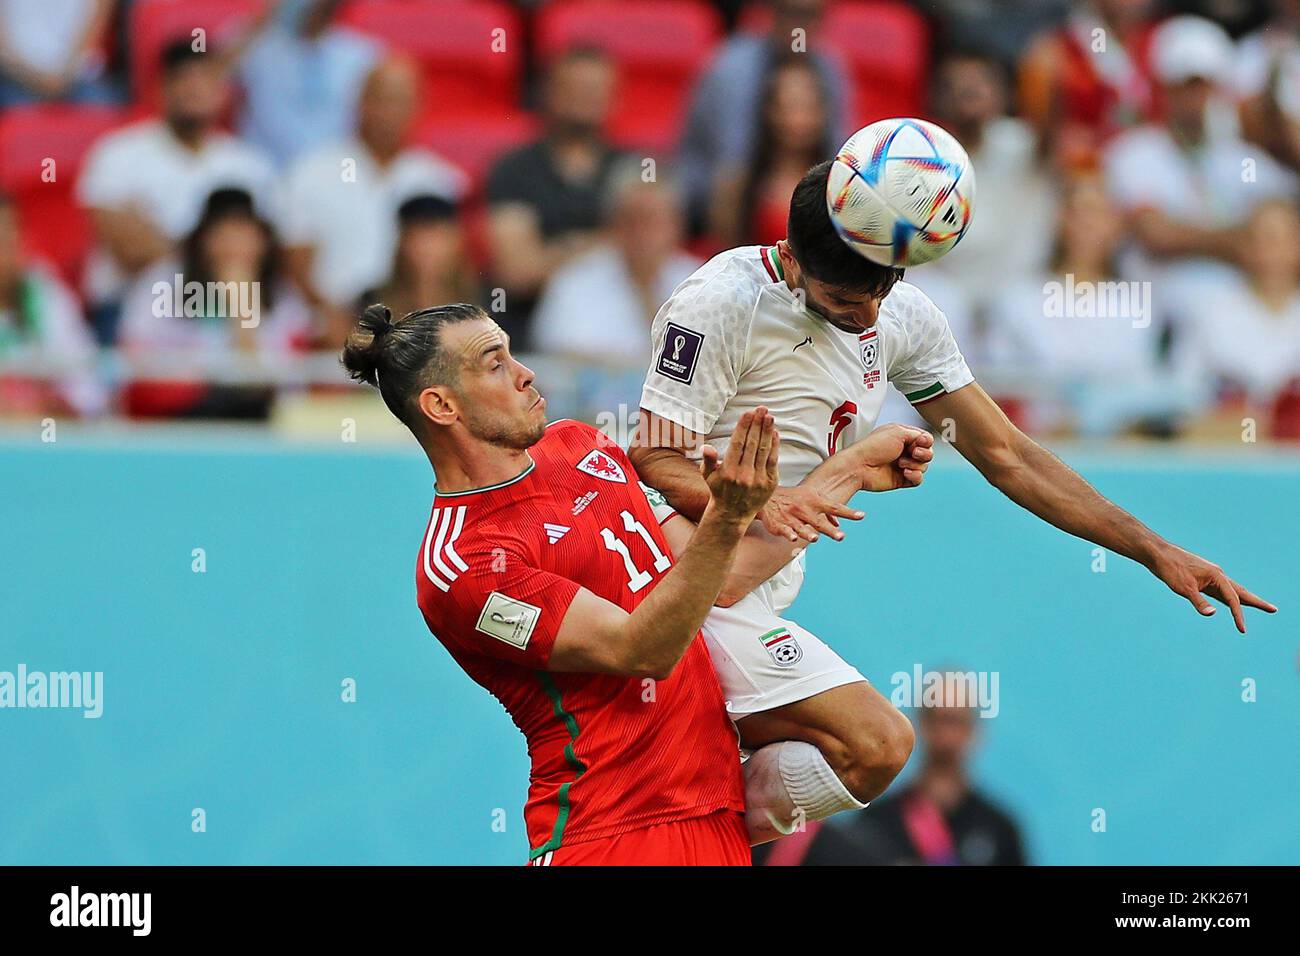 Doha, Qatar. 25th Nov, 2022. Gareth Bale of Wales disputes the bid with Milad Mohammadi of Iran, during the match between Wales and Iran, for the 2nd round of Group B of the FIFA World Cup Qatar 2022, Ahmed bin Ali Stadium this Friday 25. 30761 (Heuler Andrey/SPP) Credit: SPP Sport Press Photo. /Alamy Live News Stock Photo